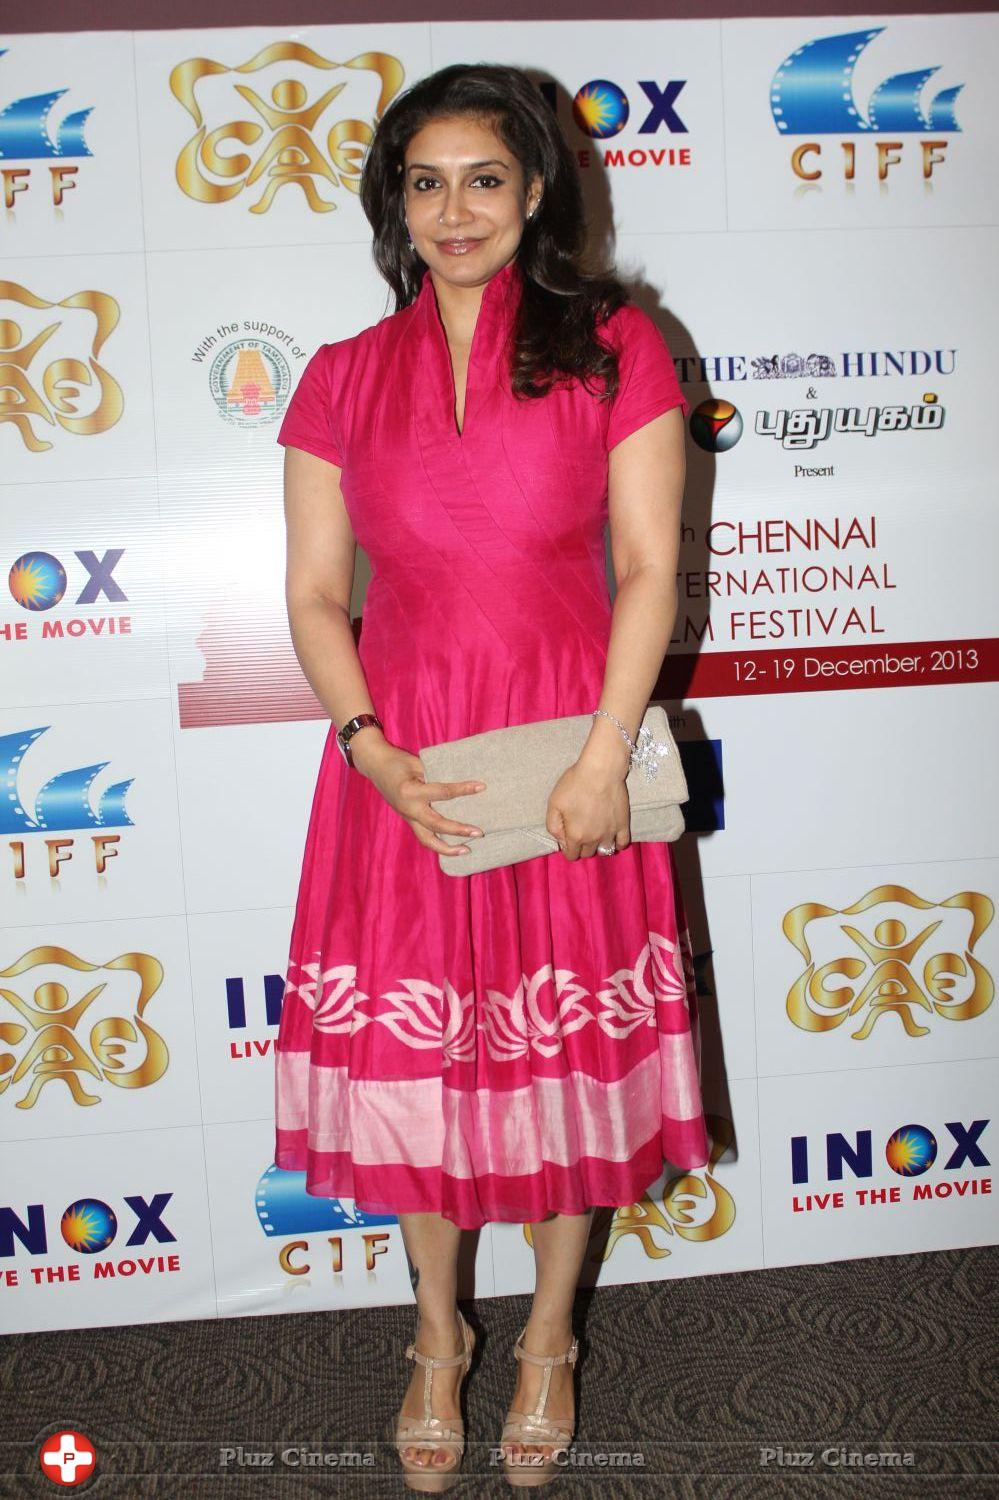 Lizy - Red Carpet in INOX at CIFF 2013 Stills | Picture 678734